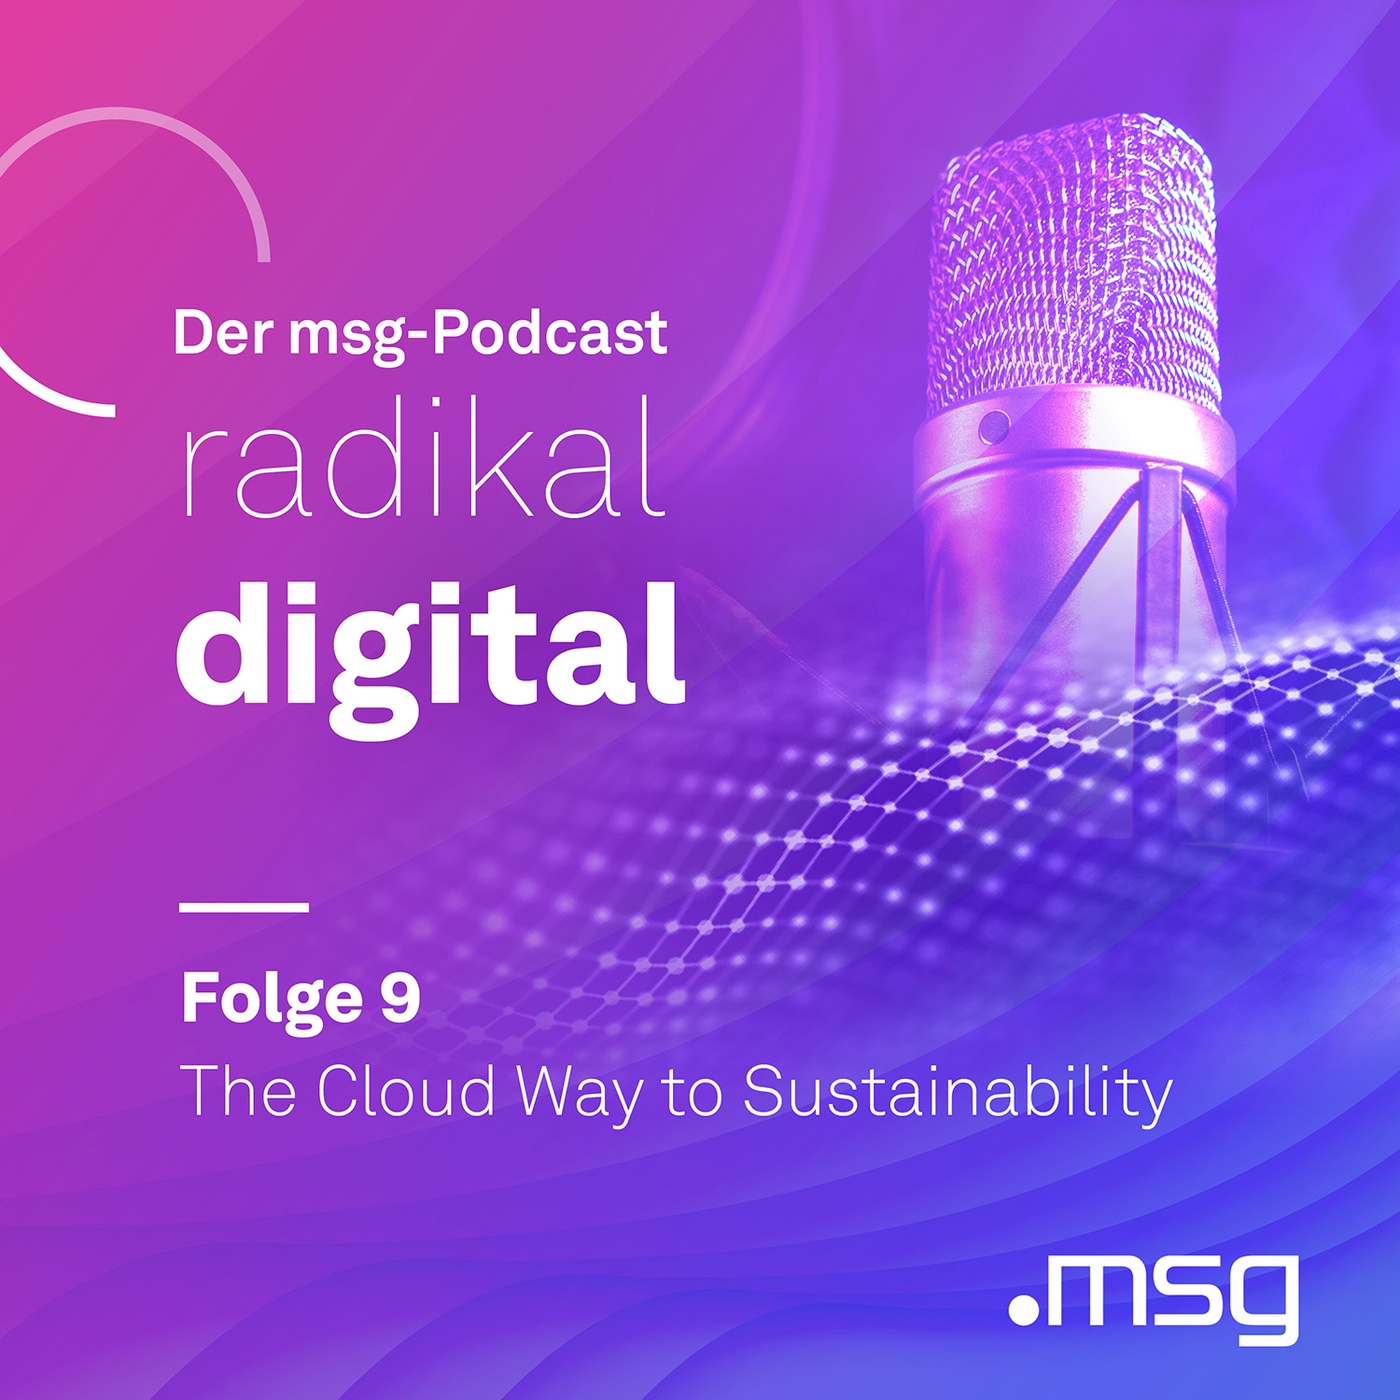 Folge 9: The Cloud Way to Sustainability